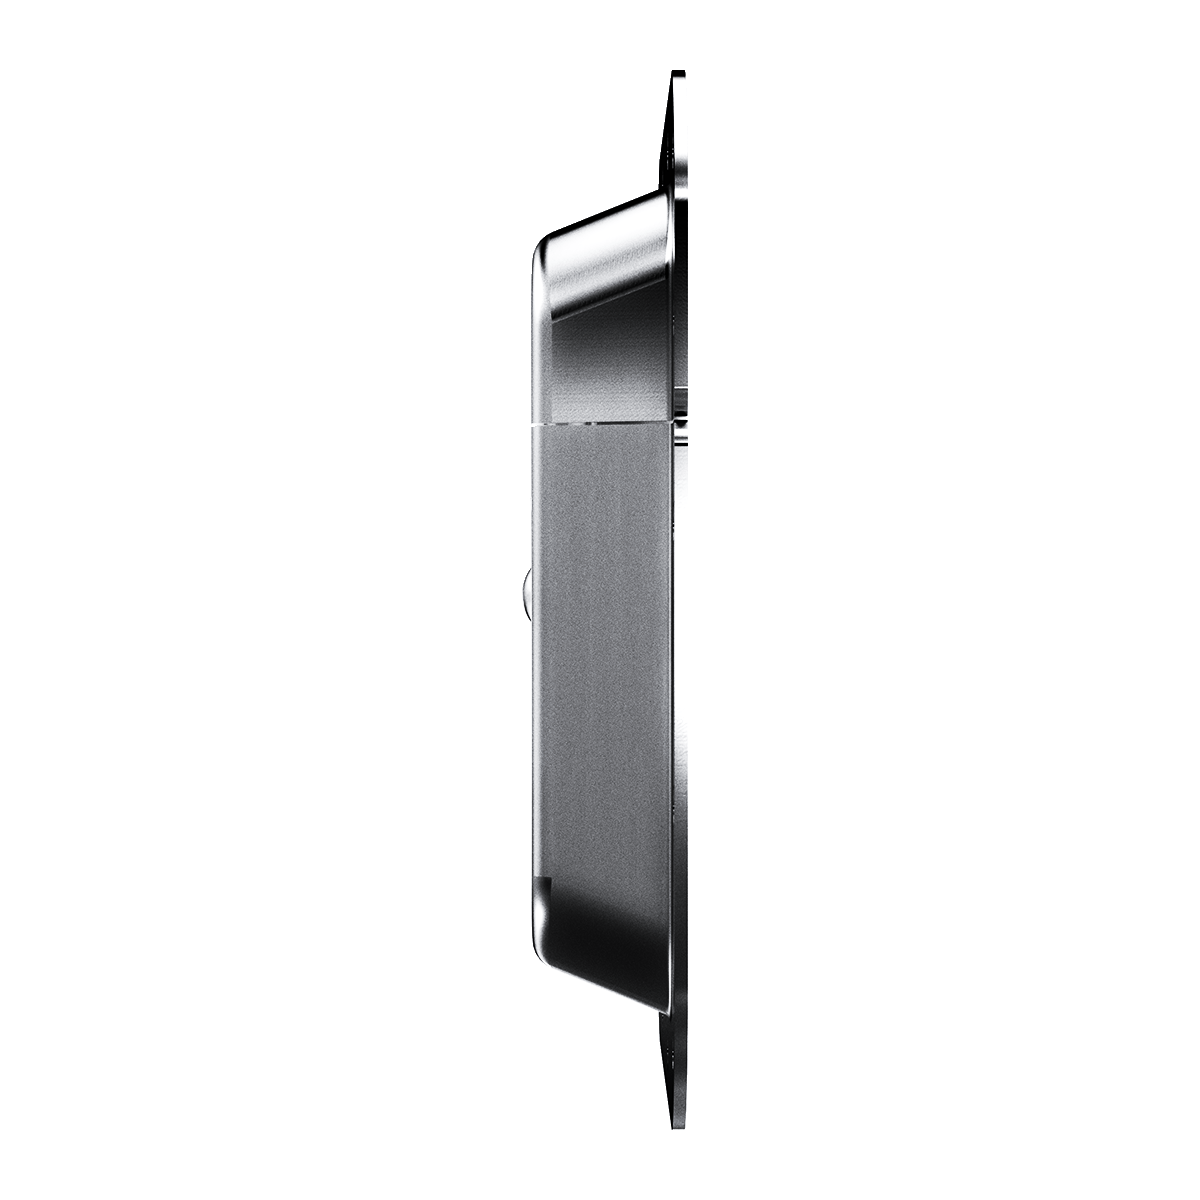 Stainless steel protected surface mount latch, side view